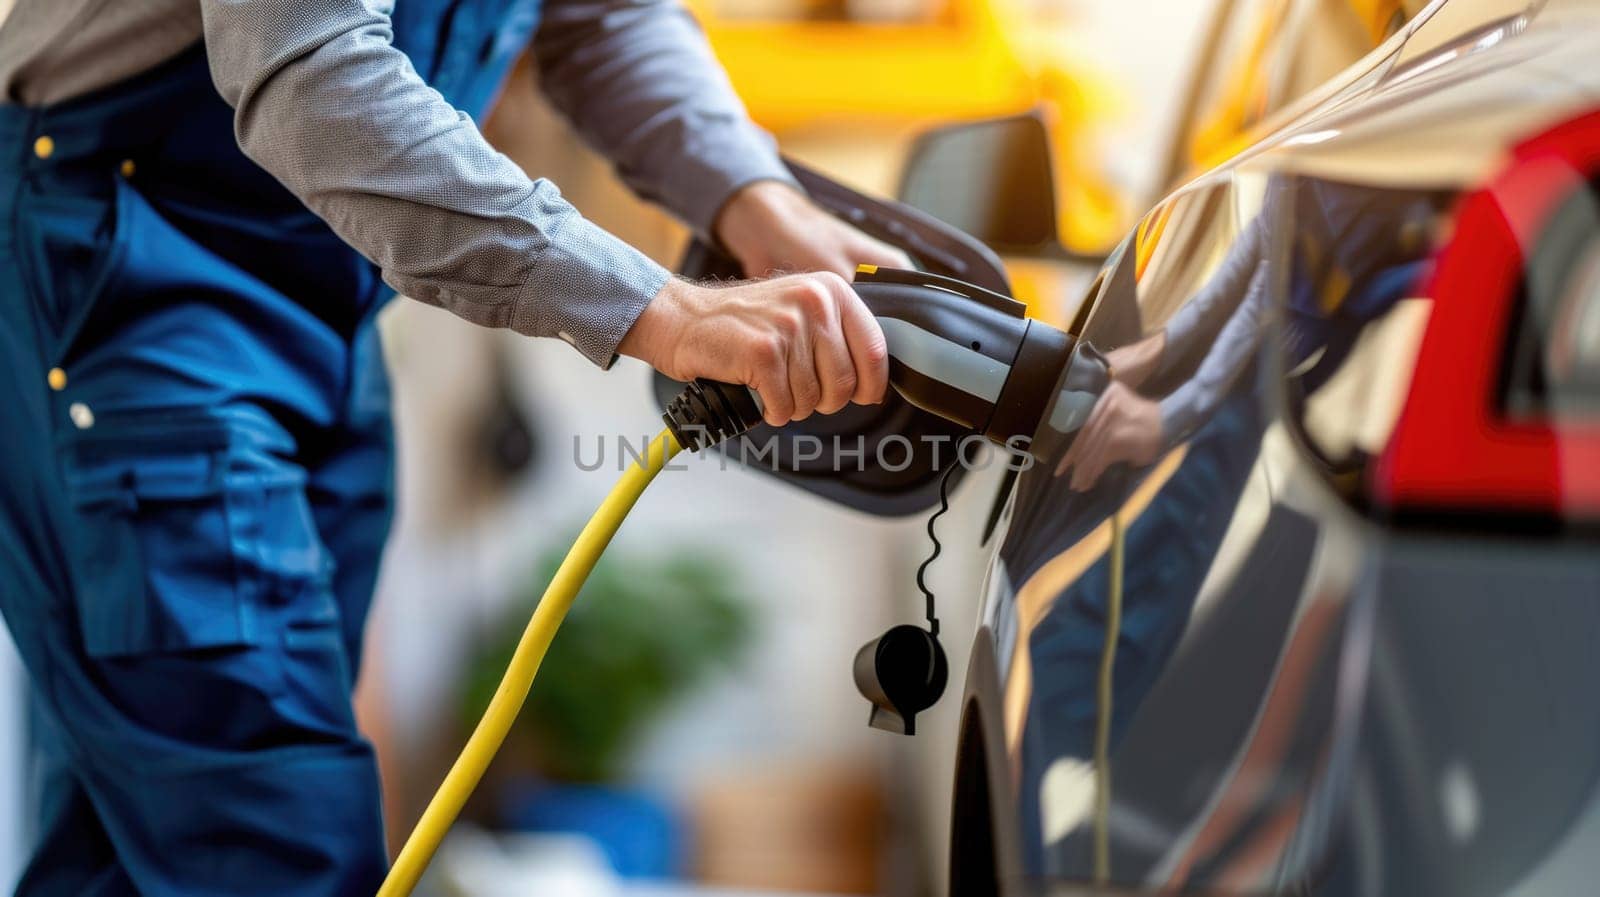 A technician connects an electric vehicle to a home charging station, illustrating the integration of renewable energy in daily life. AIG41